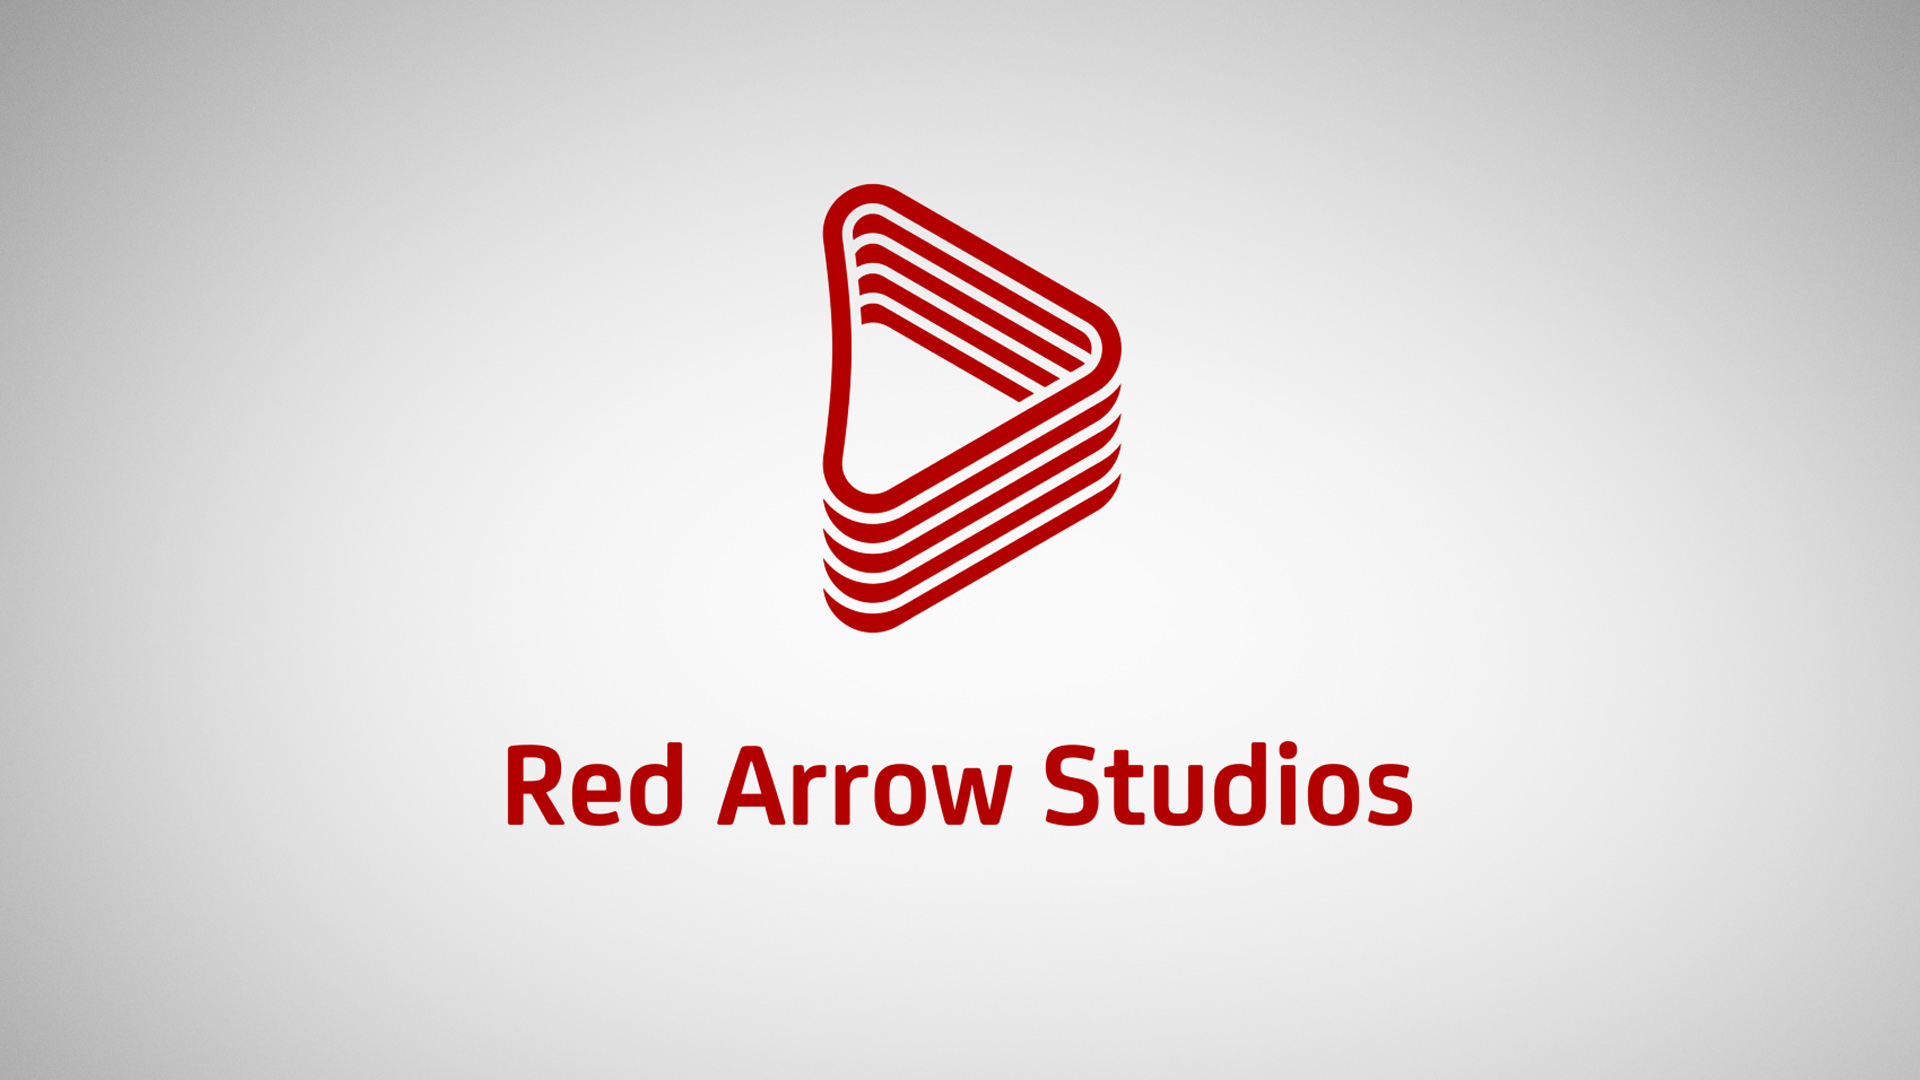 Our new logo for Red Arrow Studios